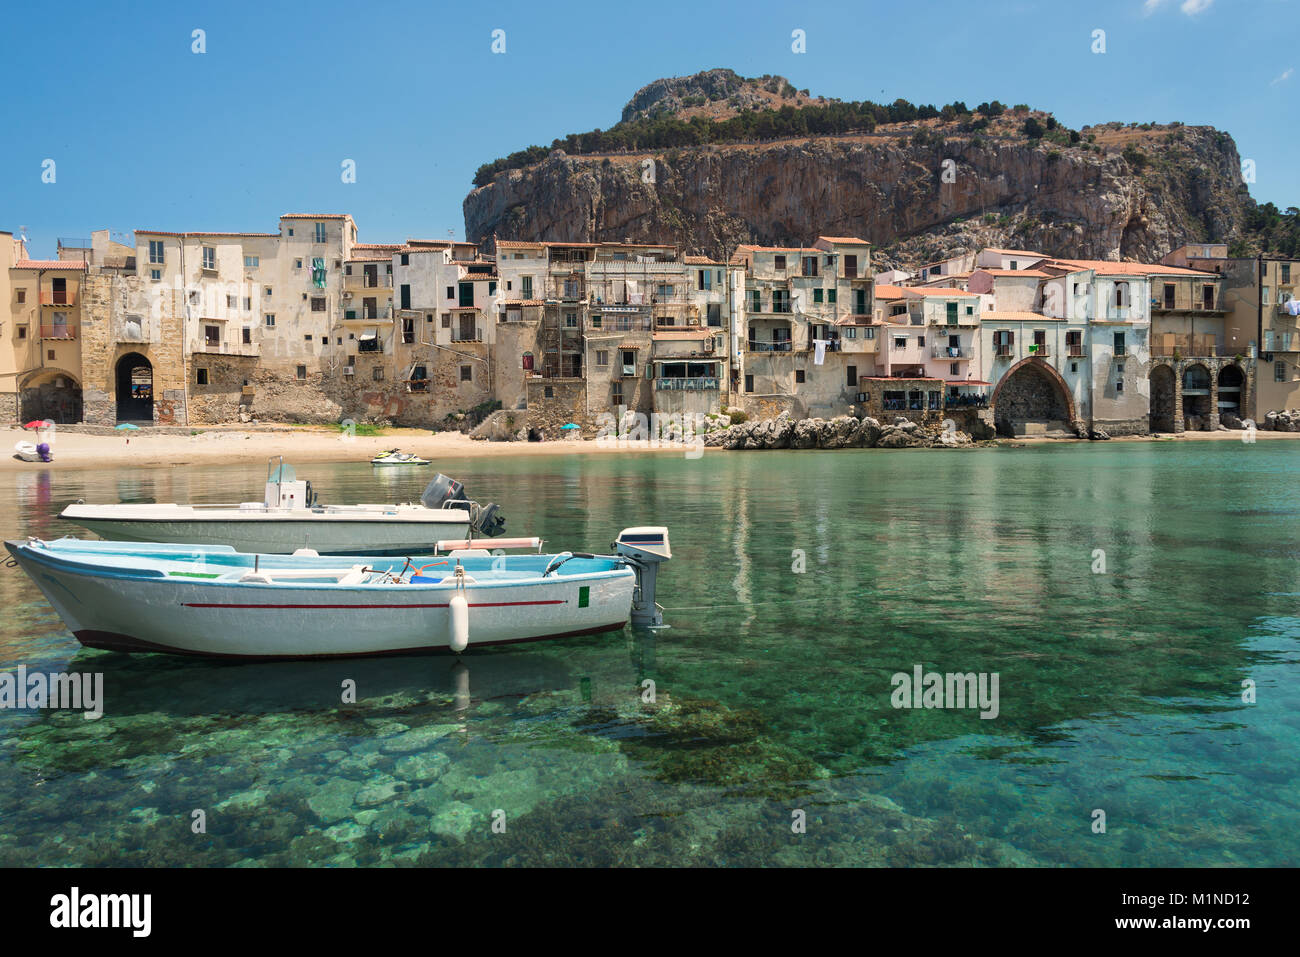 Two dinghy boats in the emerald green water of the small port at the city beach in the old town of Cefalu near Palermo in Sicily, Italy. Stock Photo